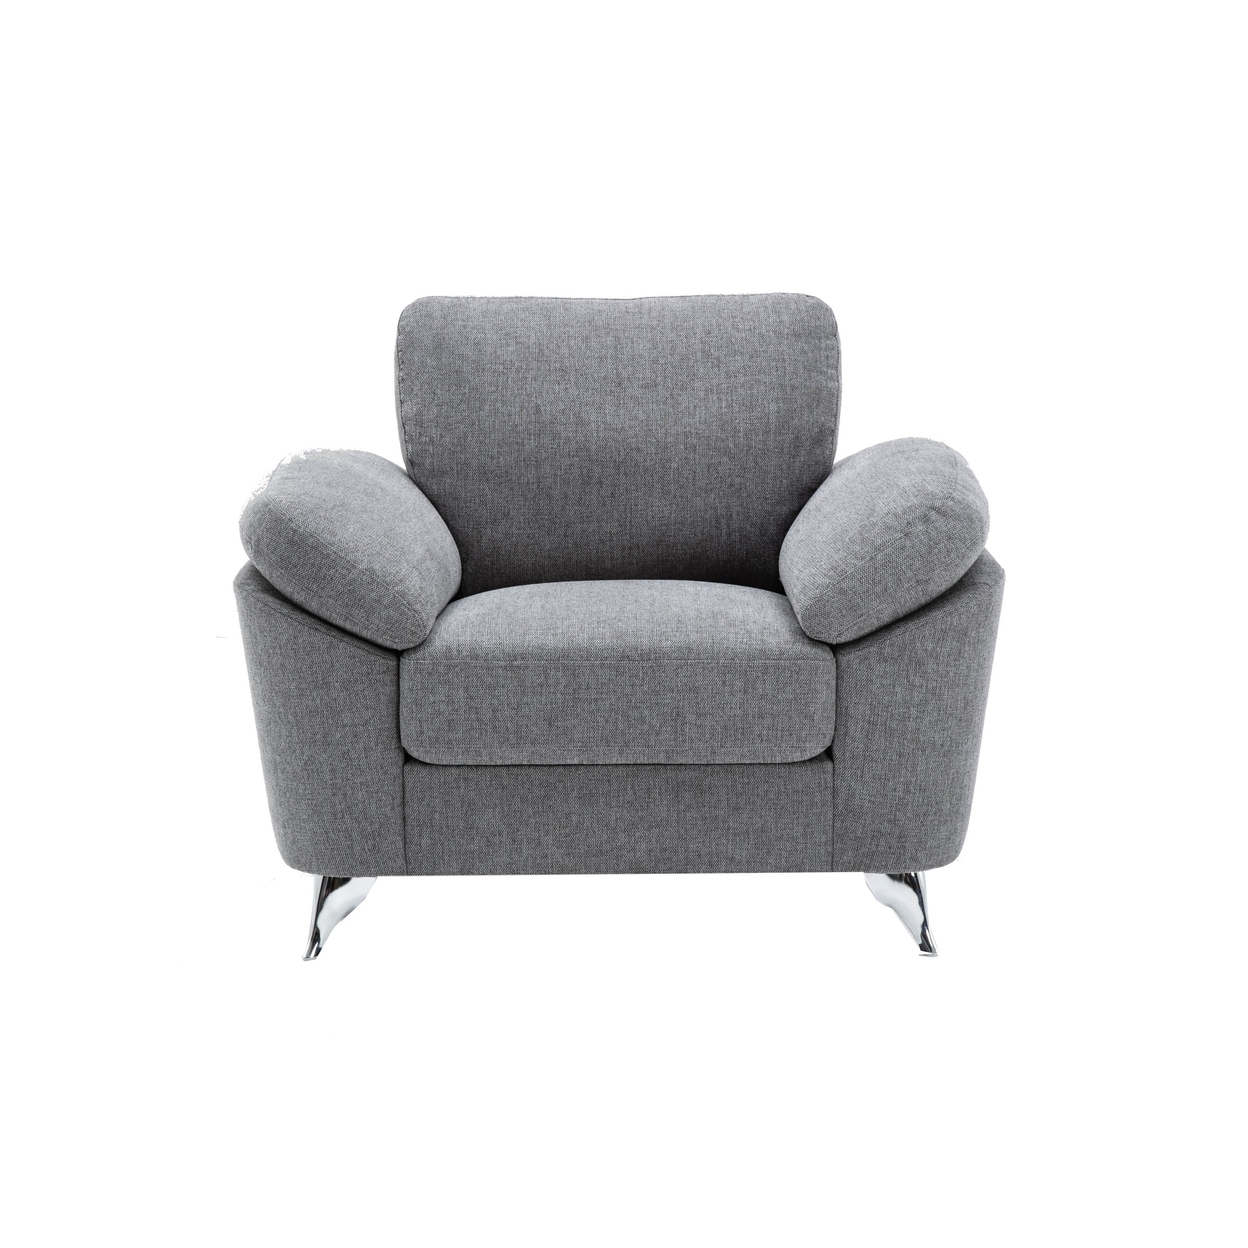 Luis 35 Inch Accent Chair, Gray Polyester Fabric, Sloped Pillow Top Arms- Saltoro Sherpi